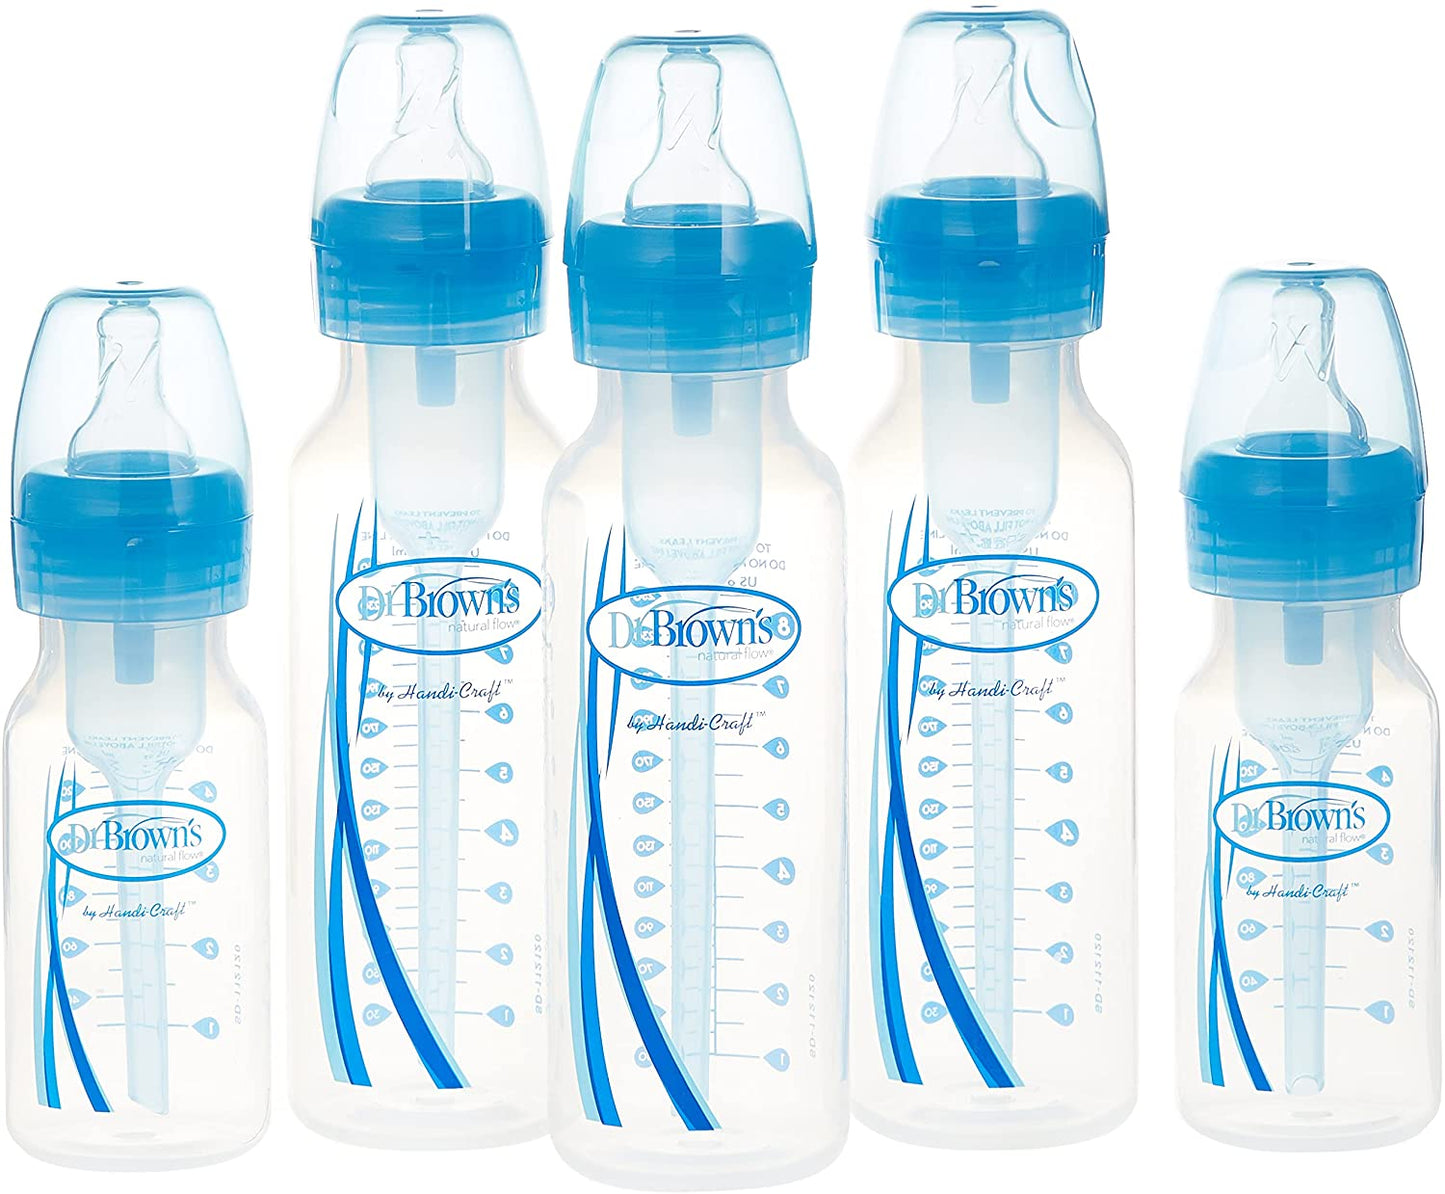 Dr. Brown's Options+ Anti-colic Bottle Gift Set | Standard neck flask